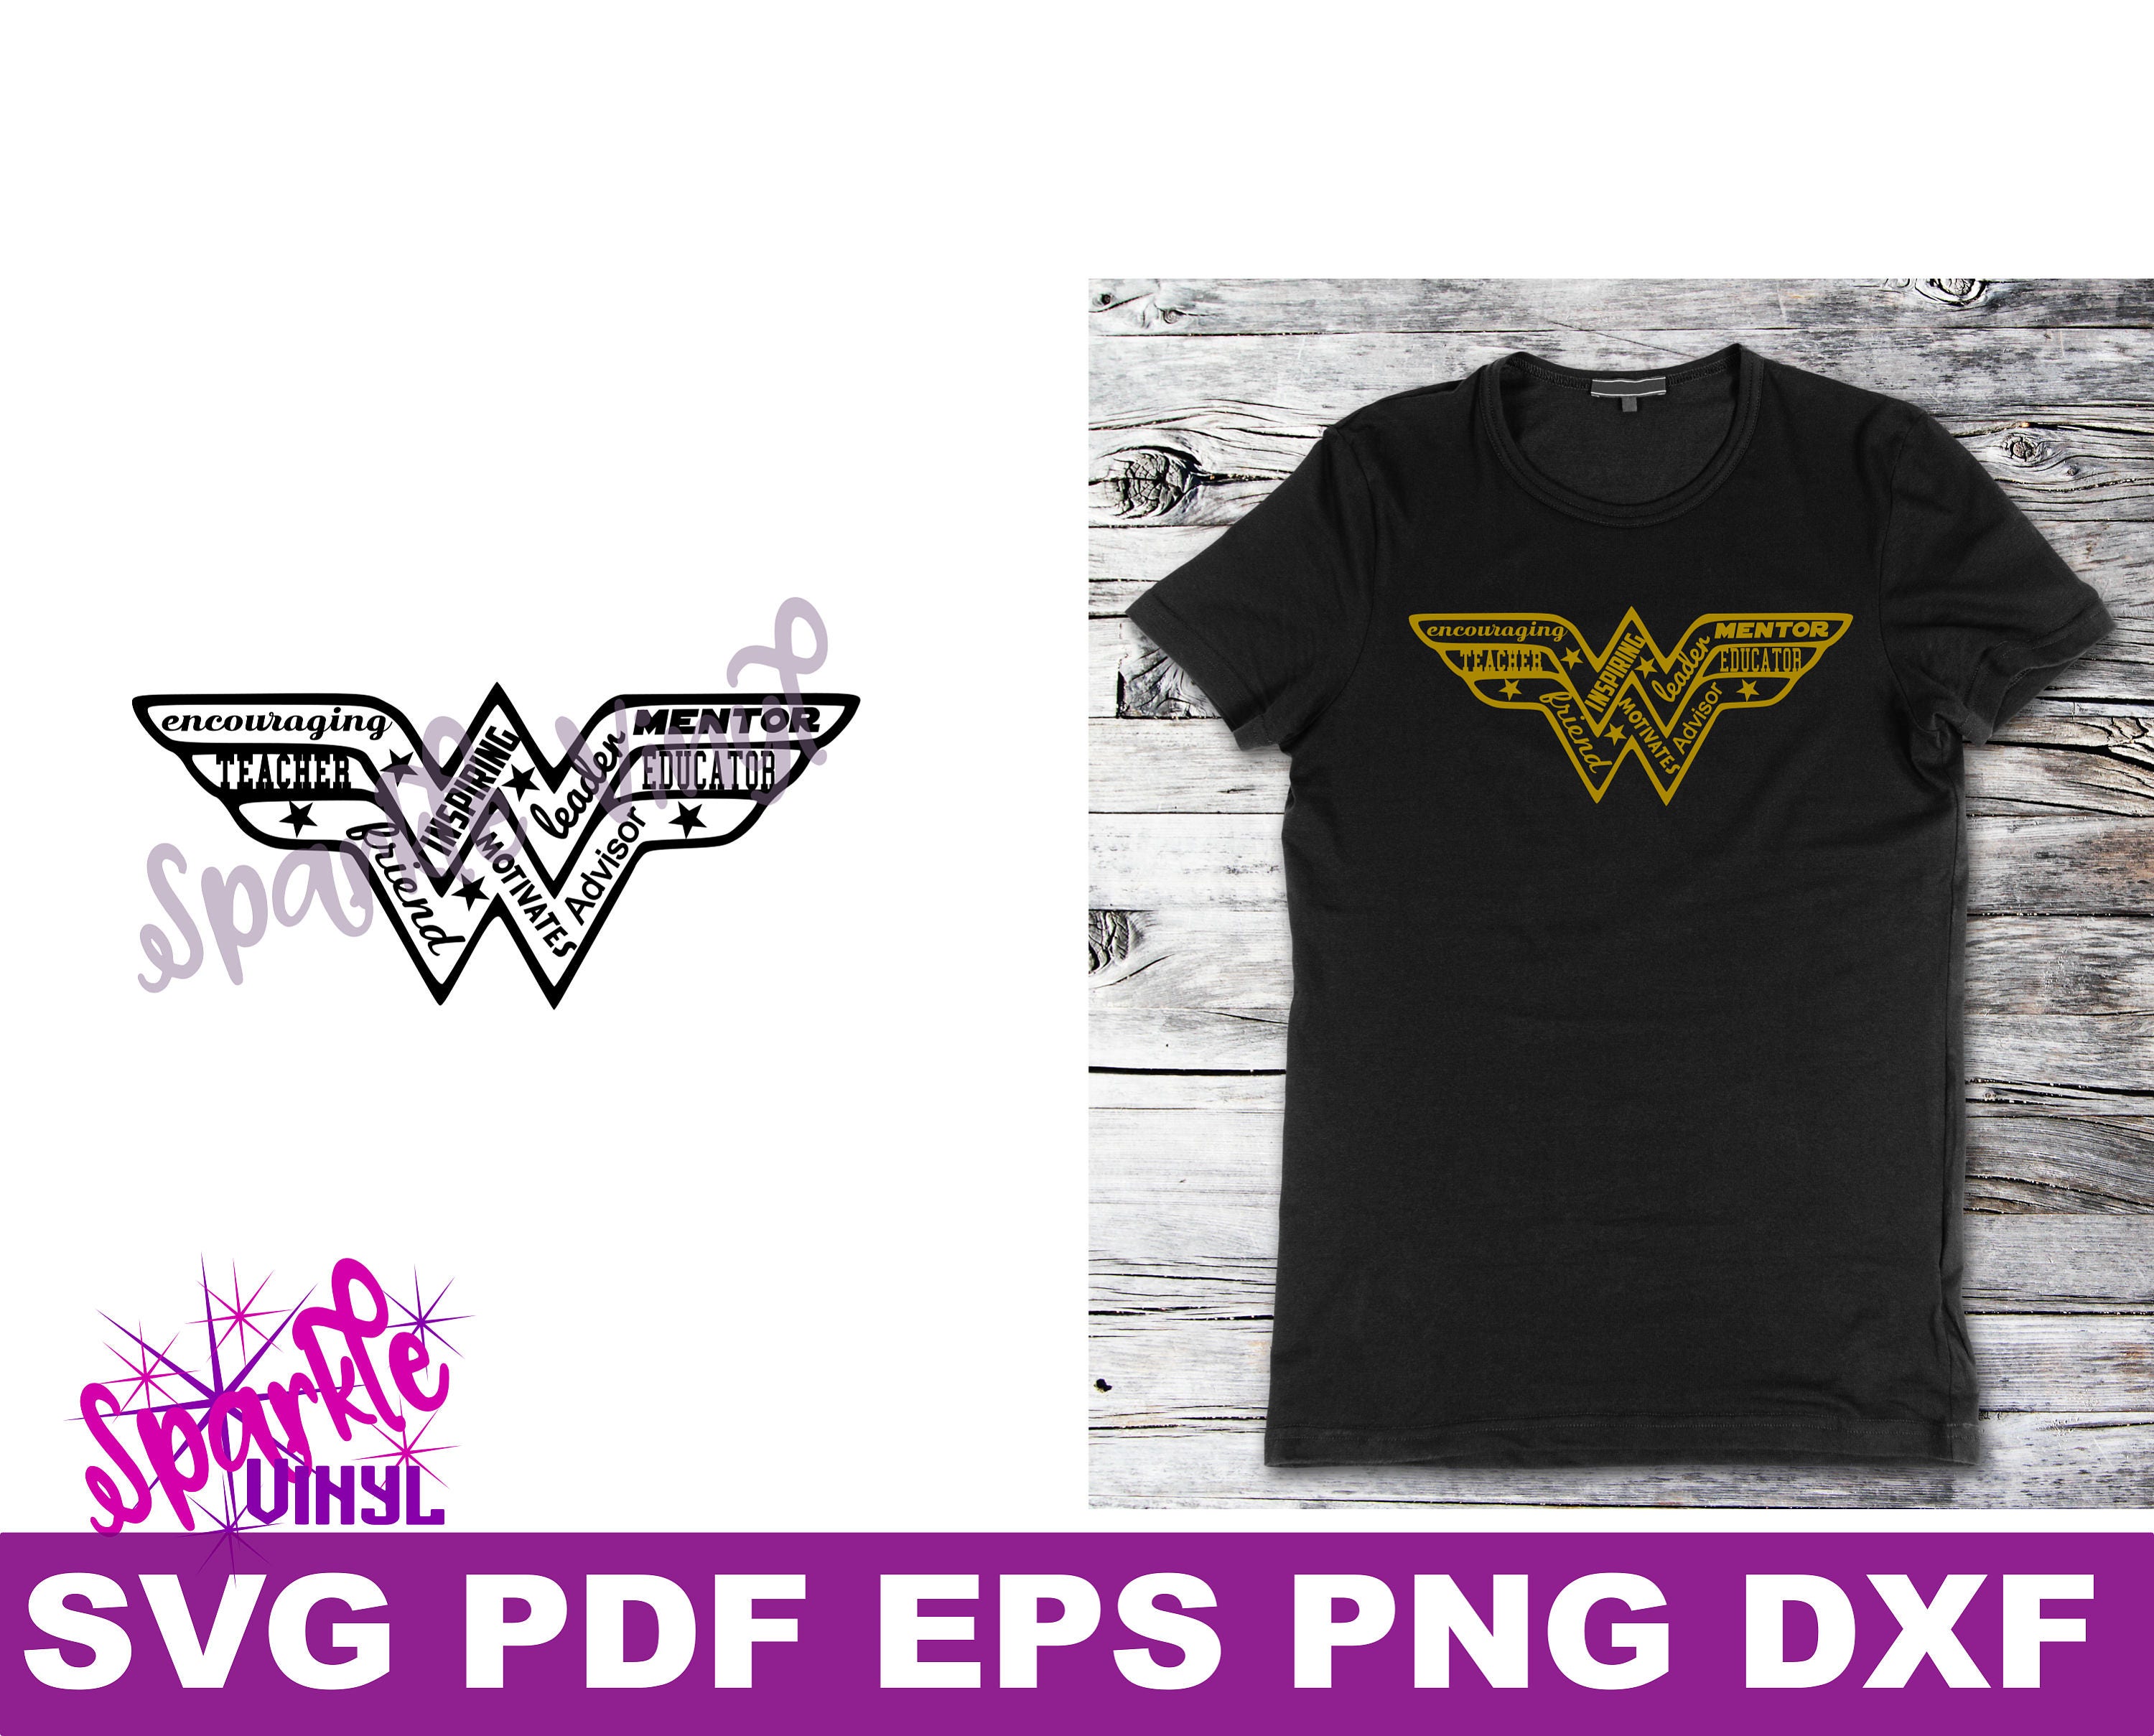 Download Svg personalized gift for teacher wonderwoman printable or cut